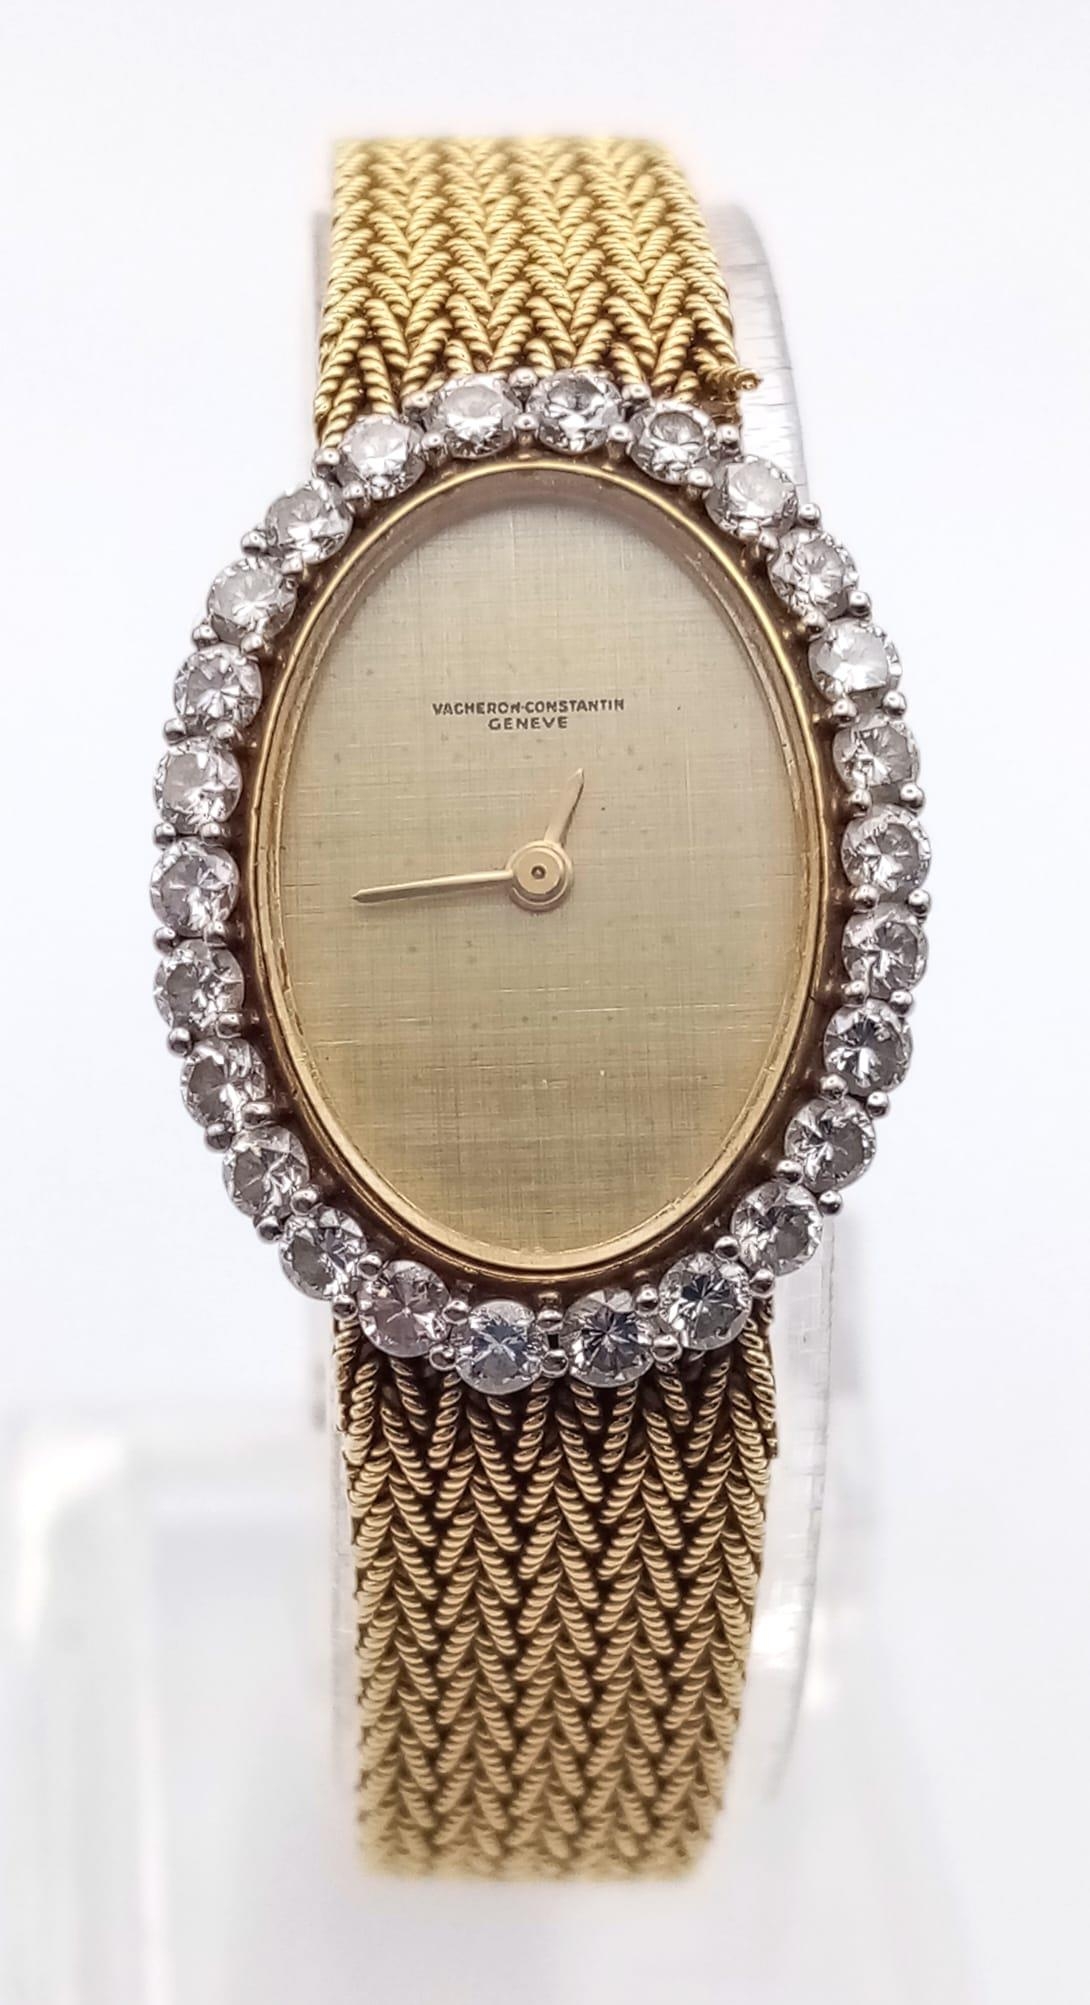 A Vacheron-Constantin 18K Yellow Gold and Diamond Ladies Watch. Gold bracelet and oval case -